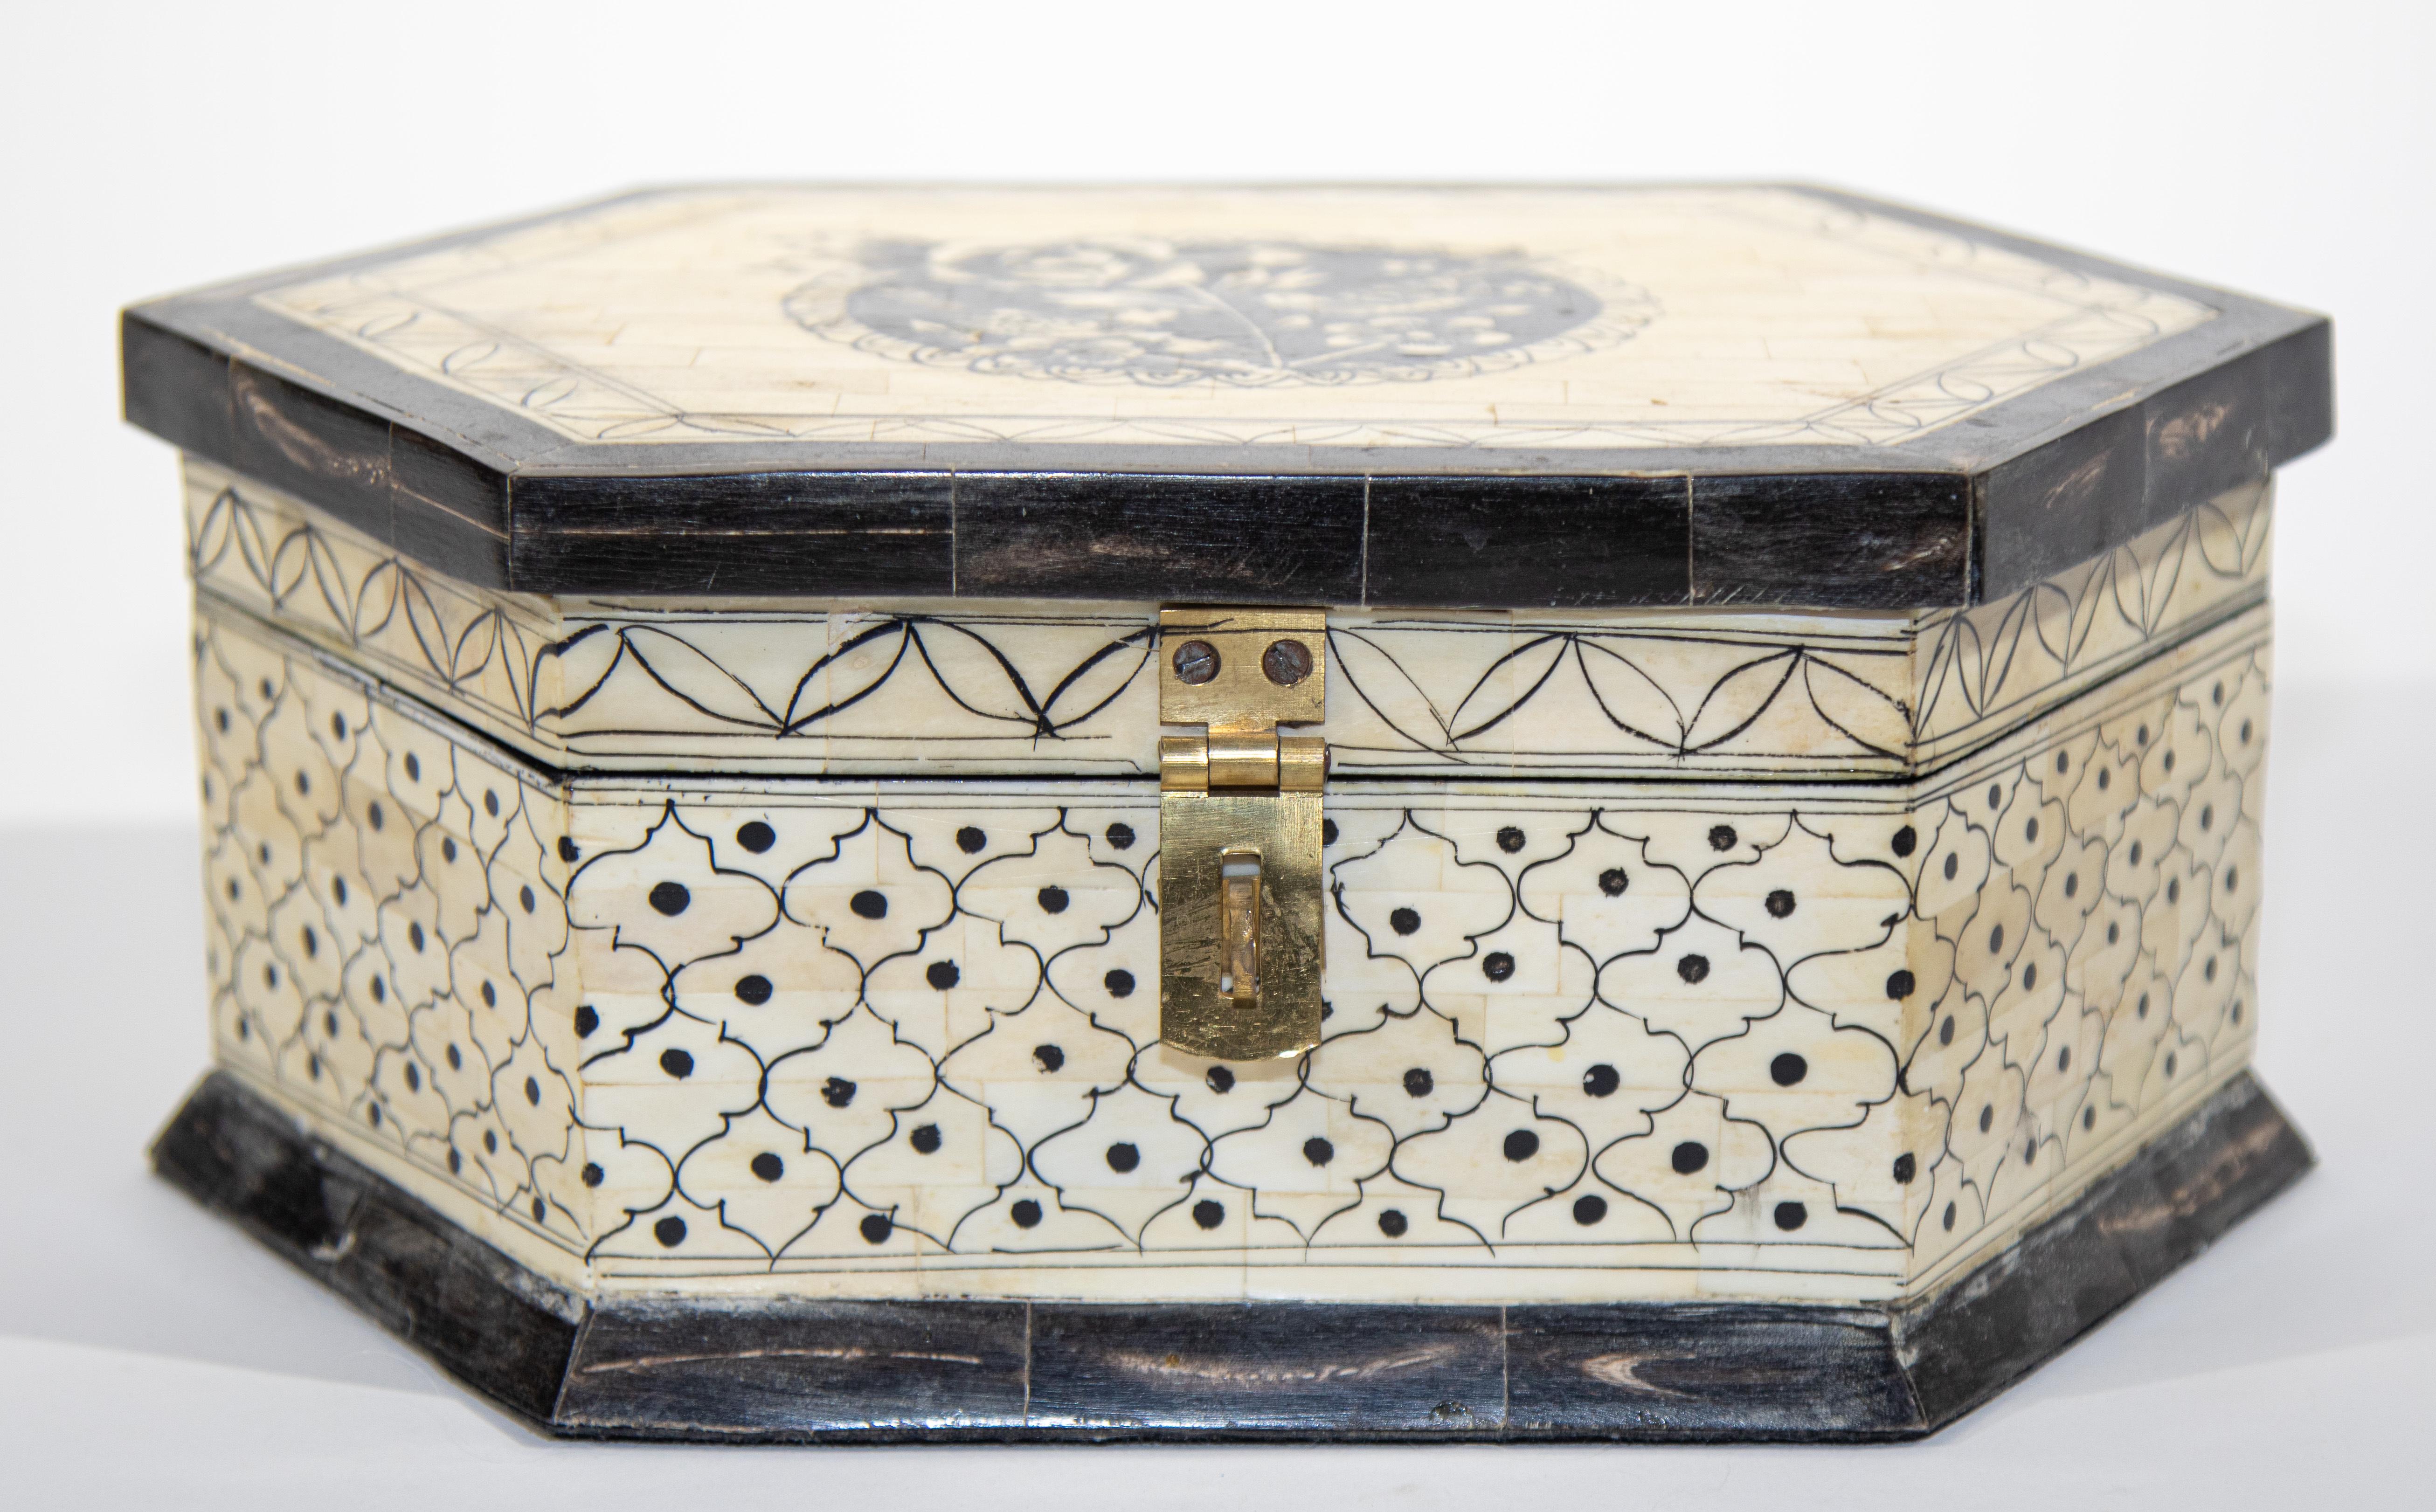 Large Decorative Mughal Raj Vizagapatam Jewelry hexagonal shape Box.
Vintage Asian lidded box crafted with bone engraved with floral and geometric Moorish designs.
Delightful Anglo Indian lidded box crafted with an intricate patterned polished